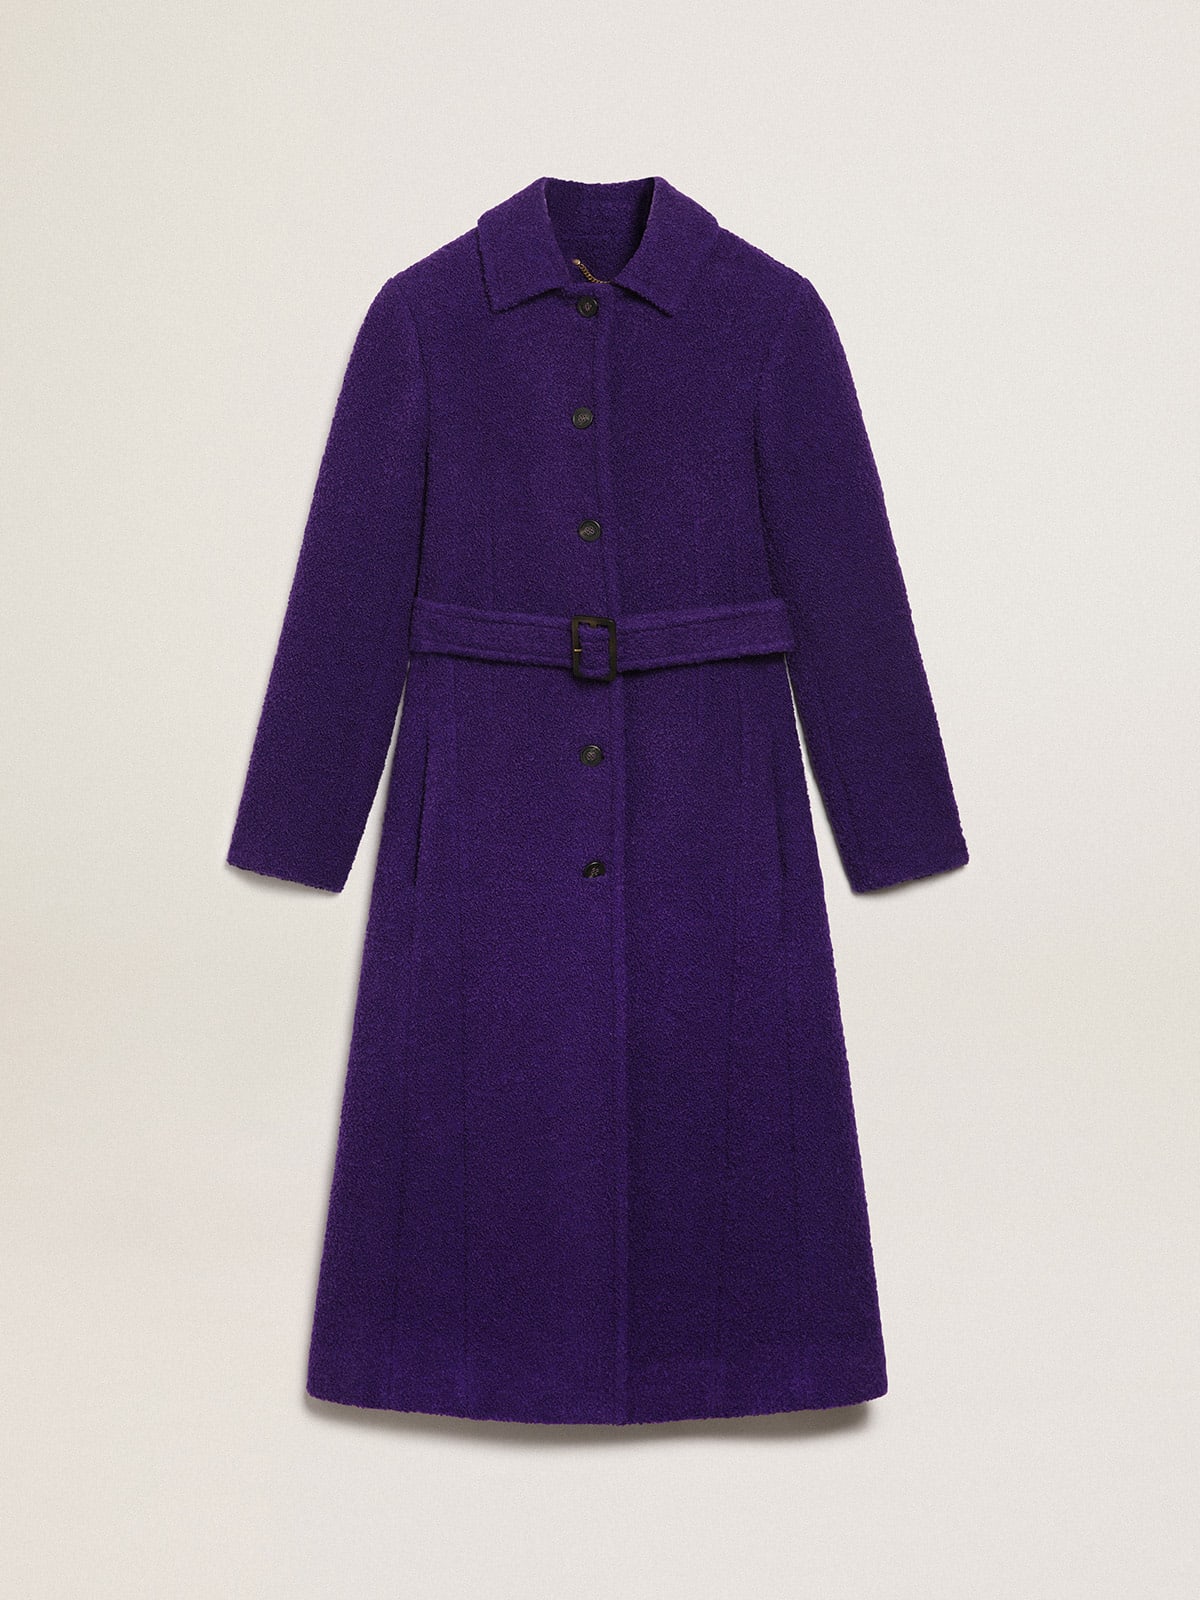 Journey Collection coat in indigo purple wool with inner lining in drawn print